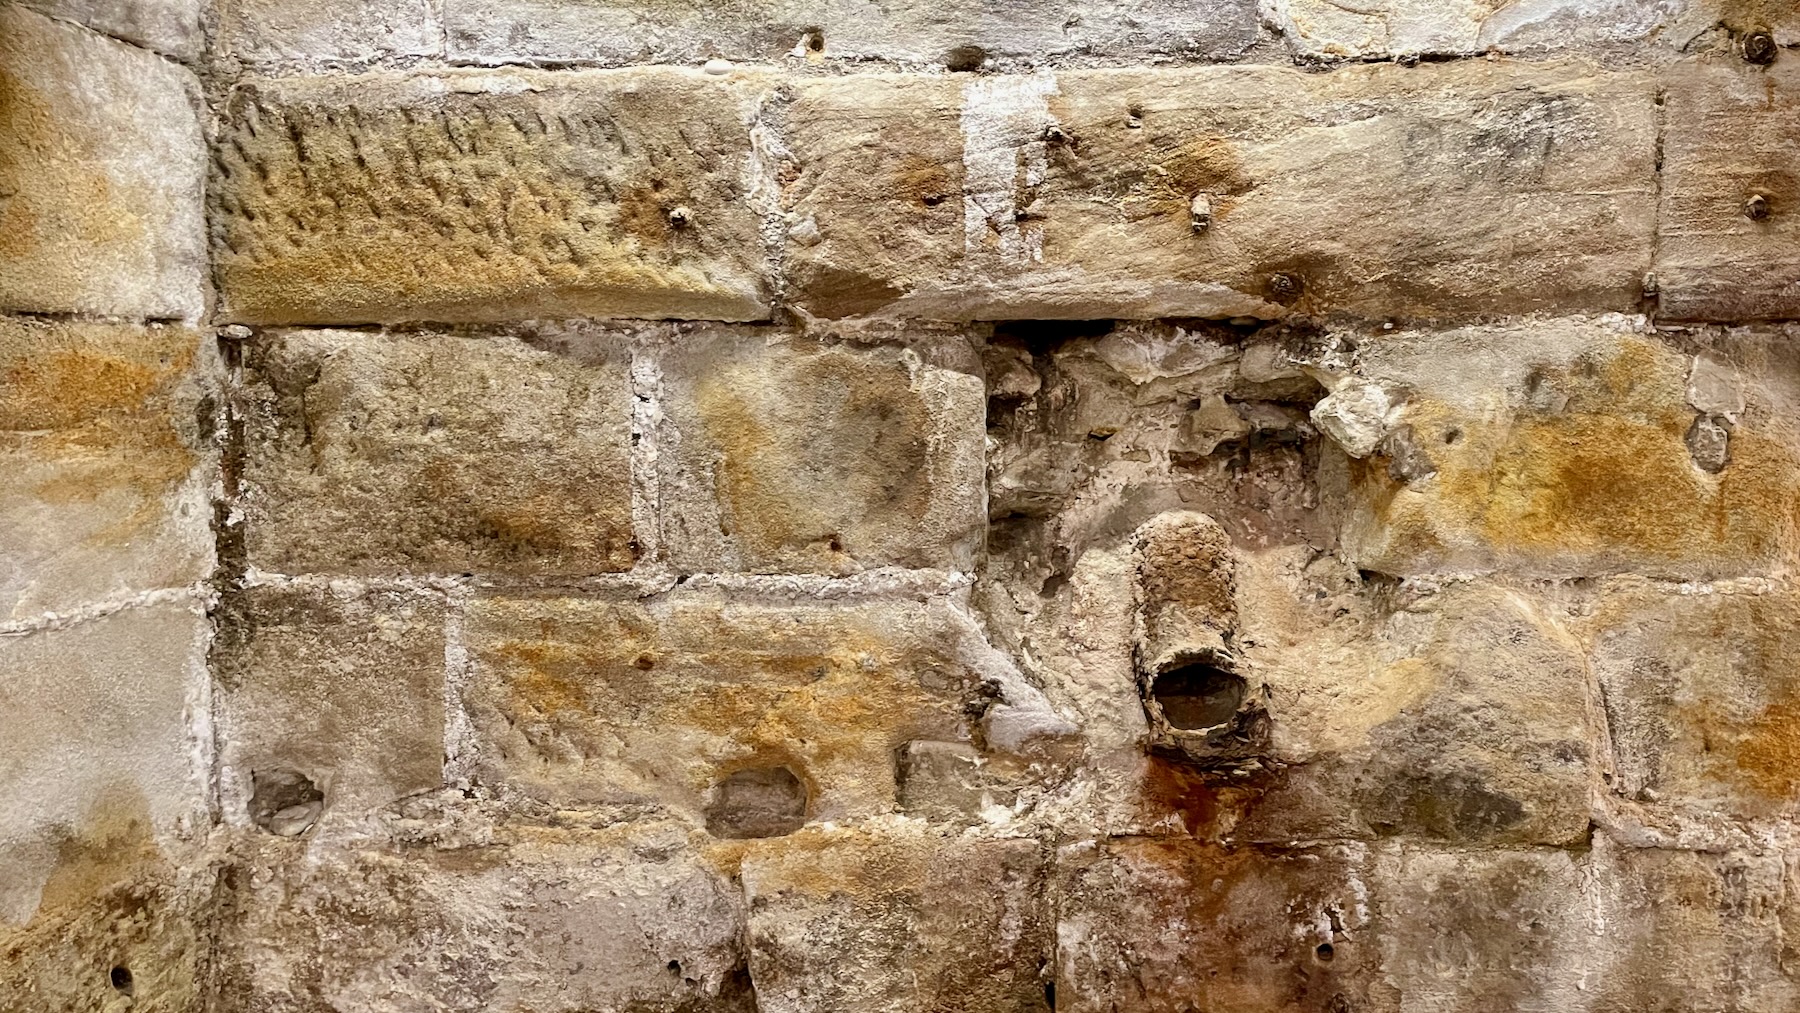 Photograph of a colonial-era sandstone wall, being the foundations of the Paragon Hotel at Circular Quay. On the lower right of the image is the rusty remnant of a pipe and spout entering the room. The beauty is in the textures.